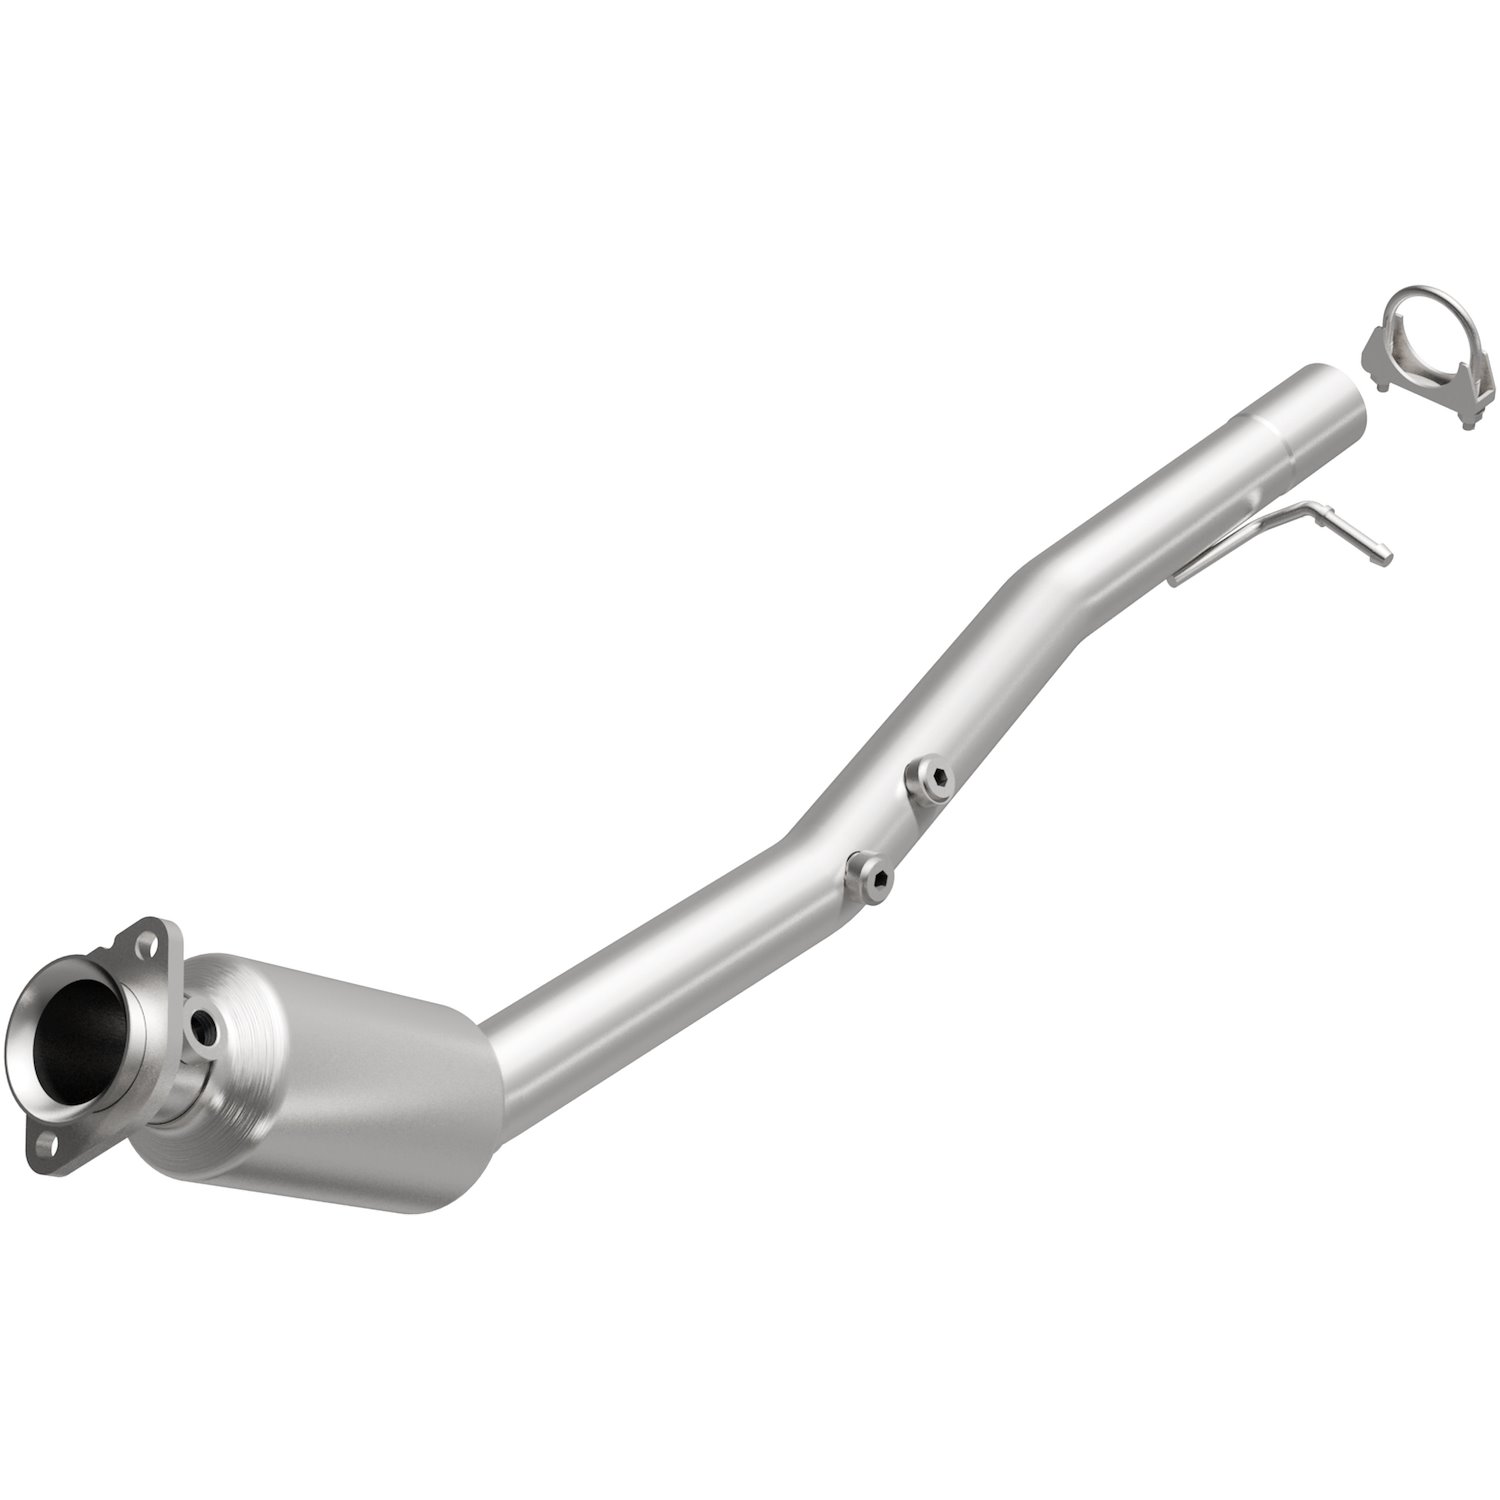 2007-2008 Land Rover Range Rover California Grade CARB Compliant Direct-Fit Catalytic Converter